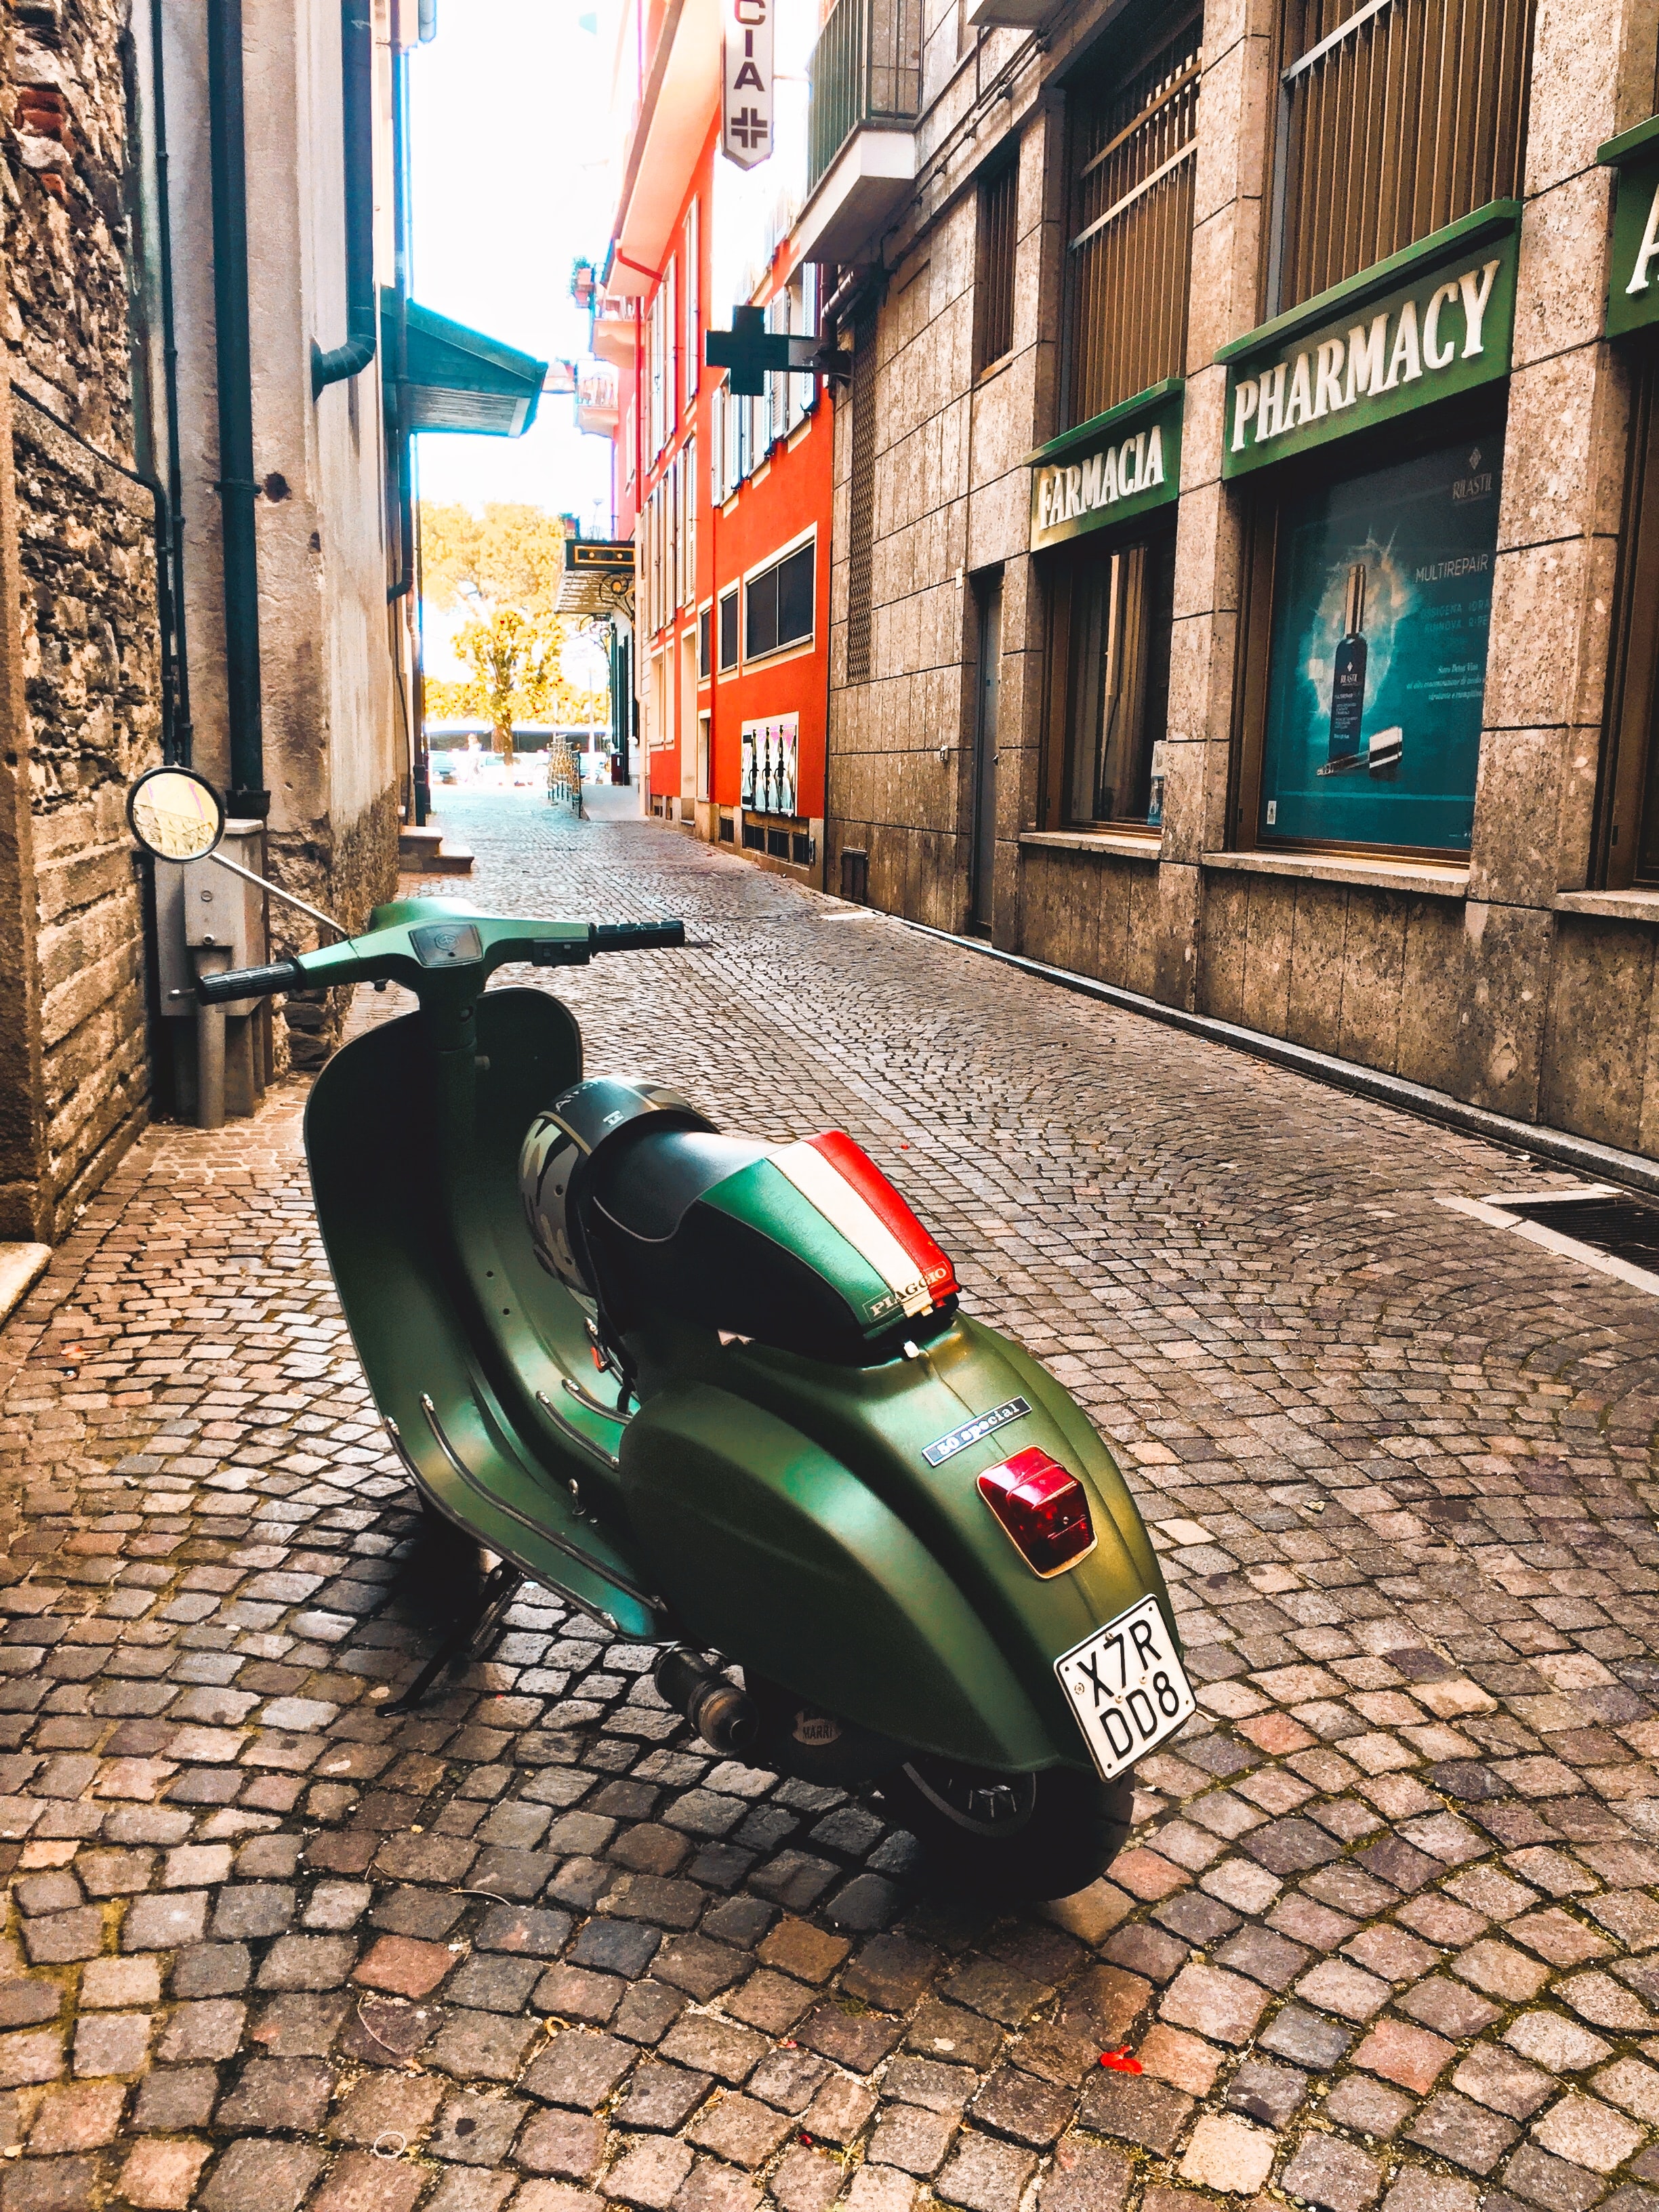 How I learned Vespa by thinking in Solr